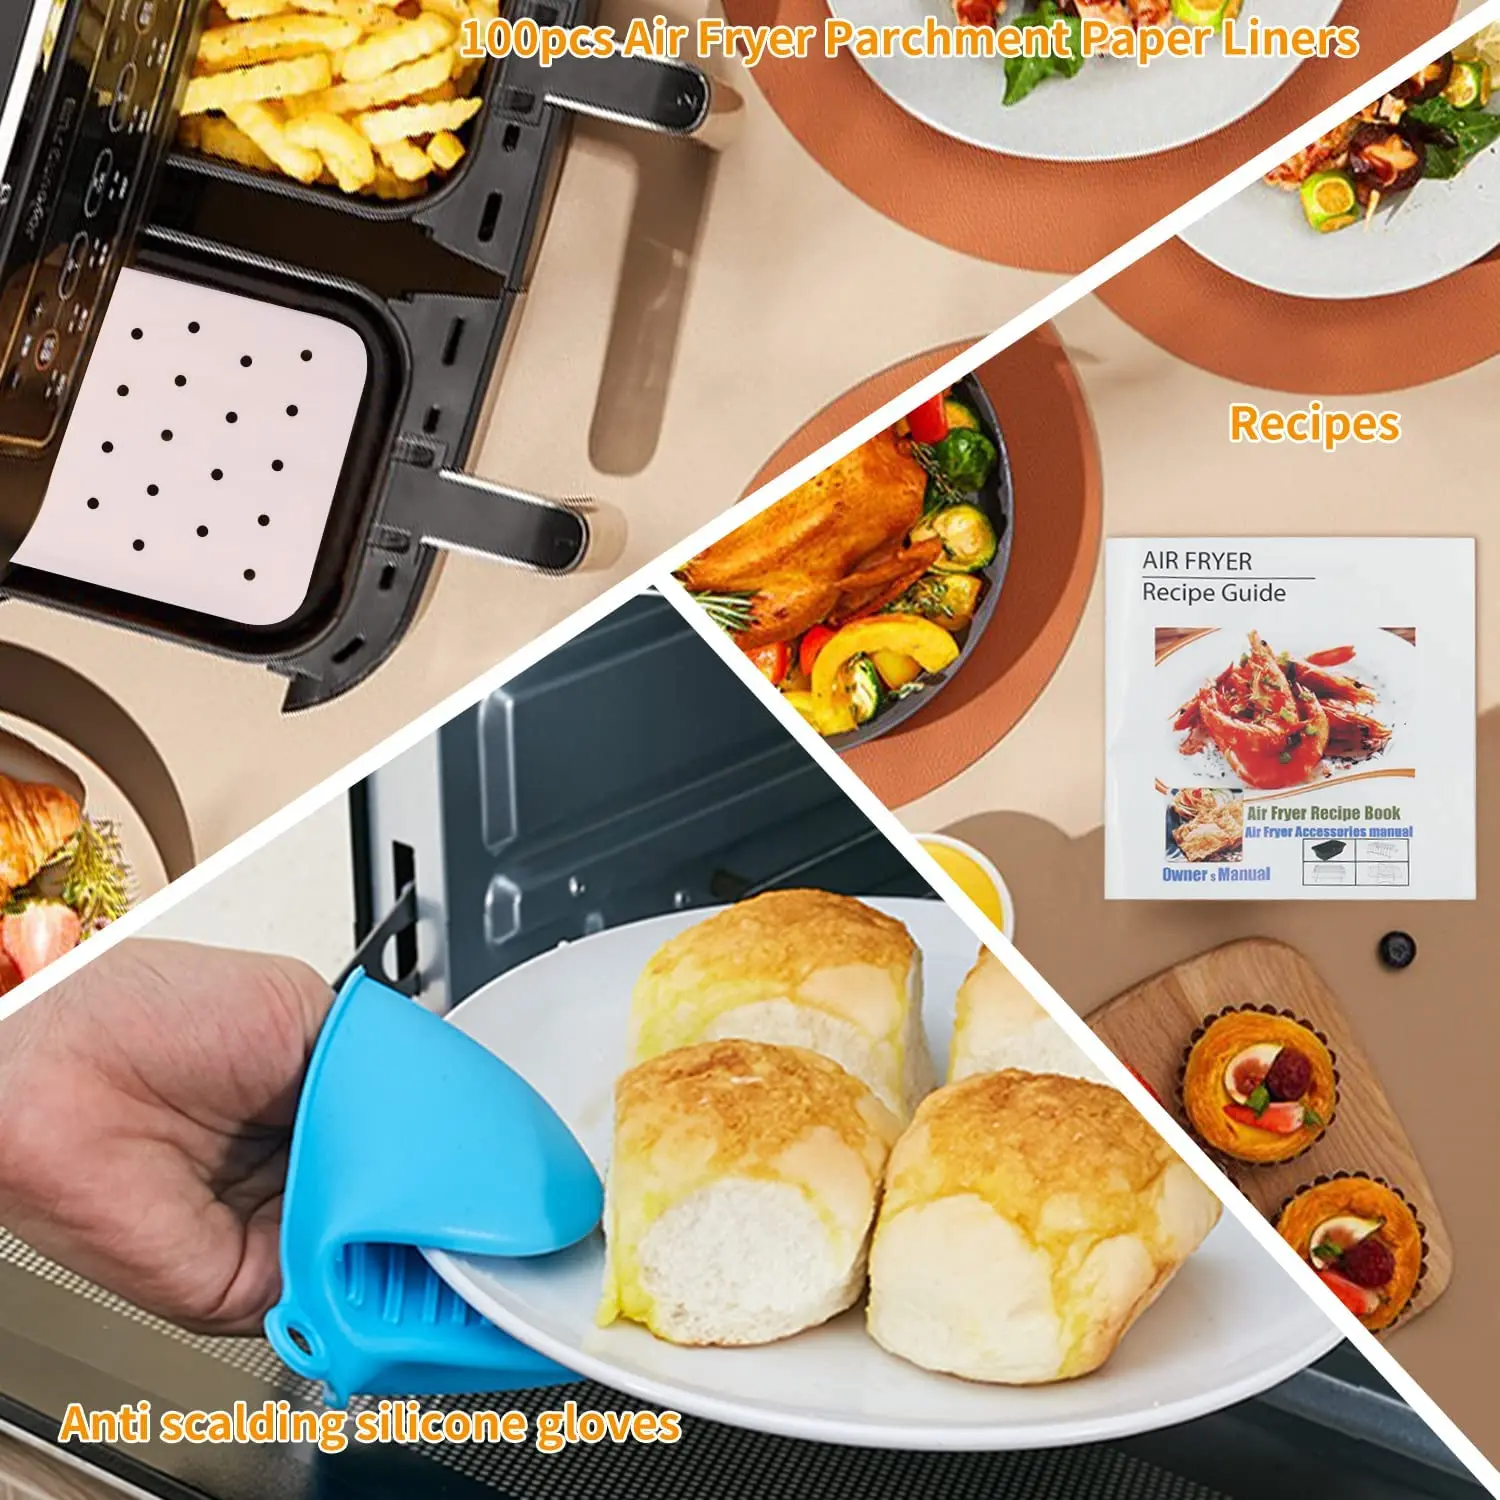 https://ae01.alicdn.com/kf/Sa7507942e41044169ade0660048ec459y/Double-Basket-Air-Fryer-Accessories-Set-Home-Barbecue-Grill-Baking-Mold-Cake-Toast-Tool-for-Gowise.jpg